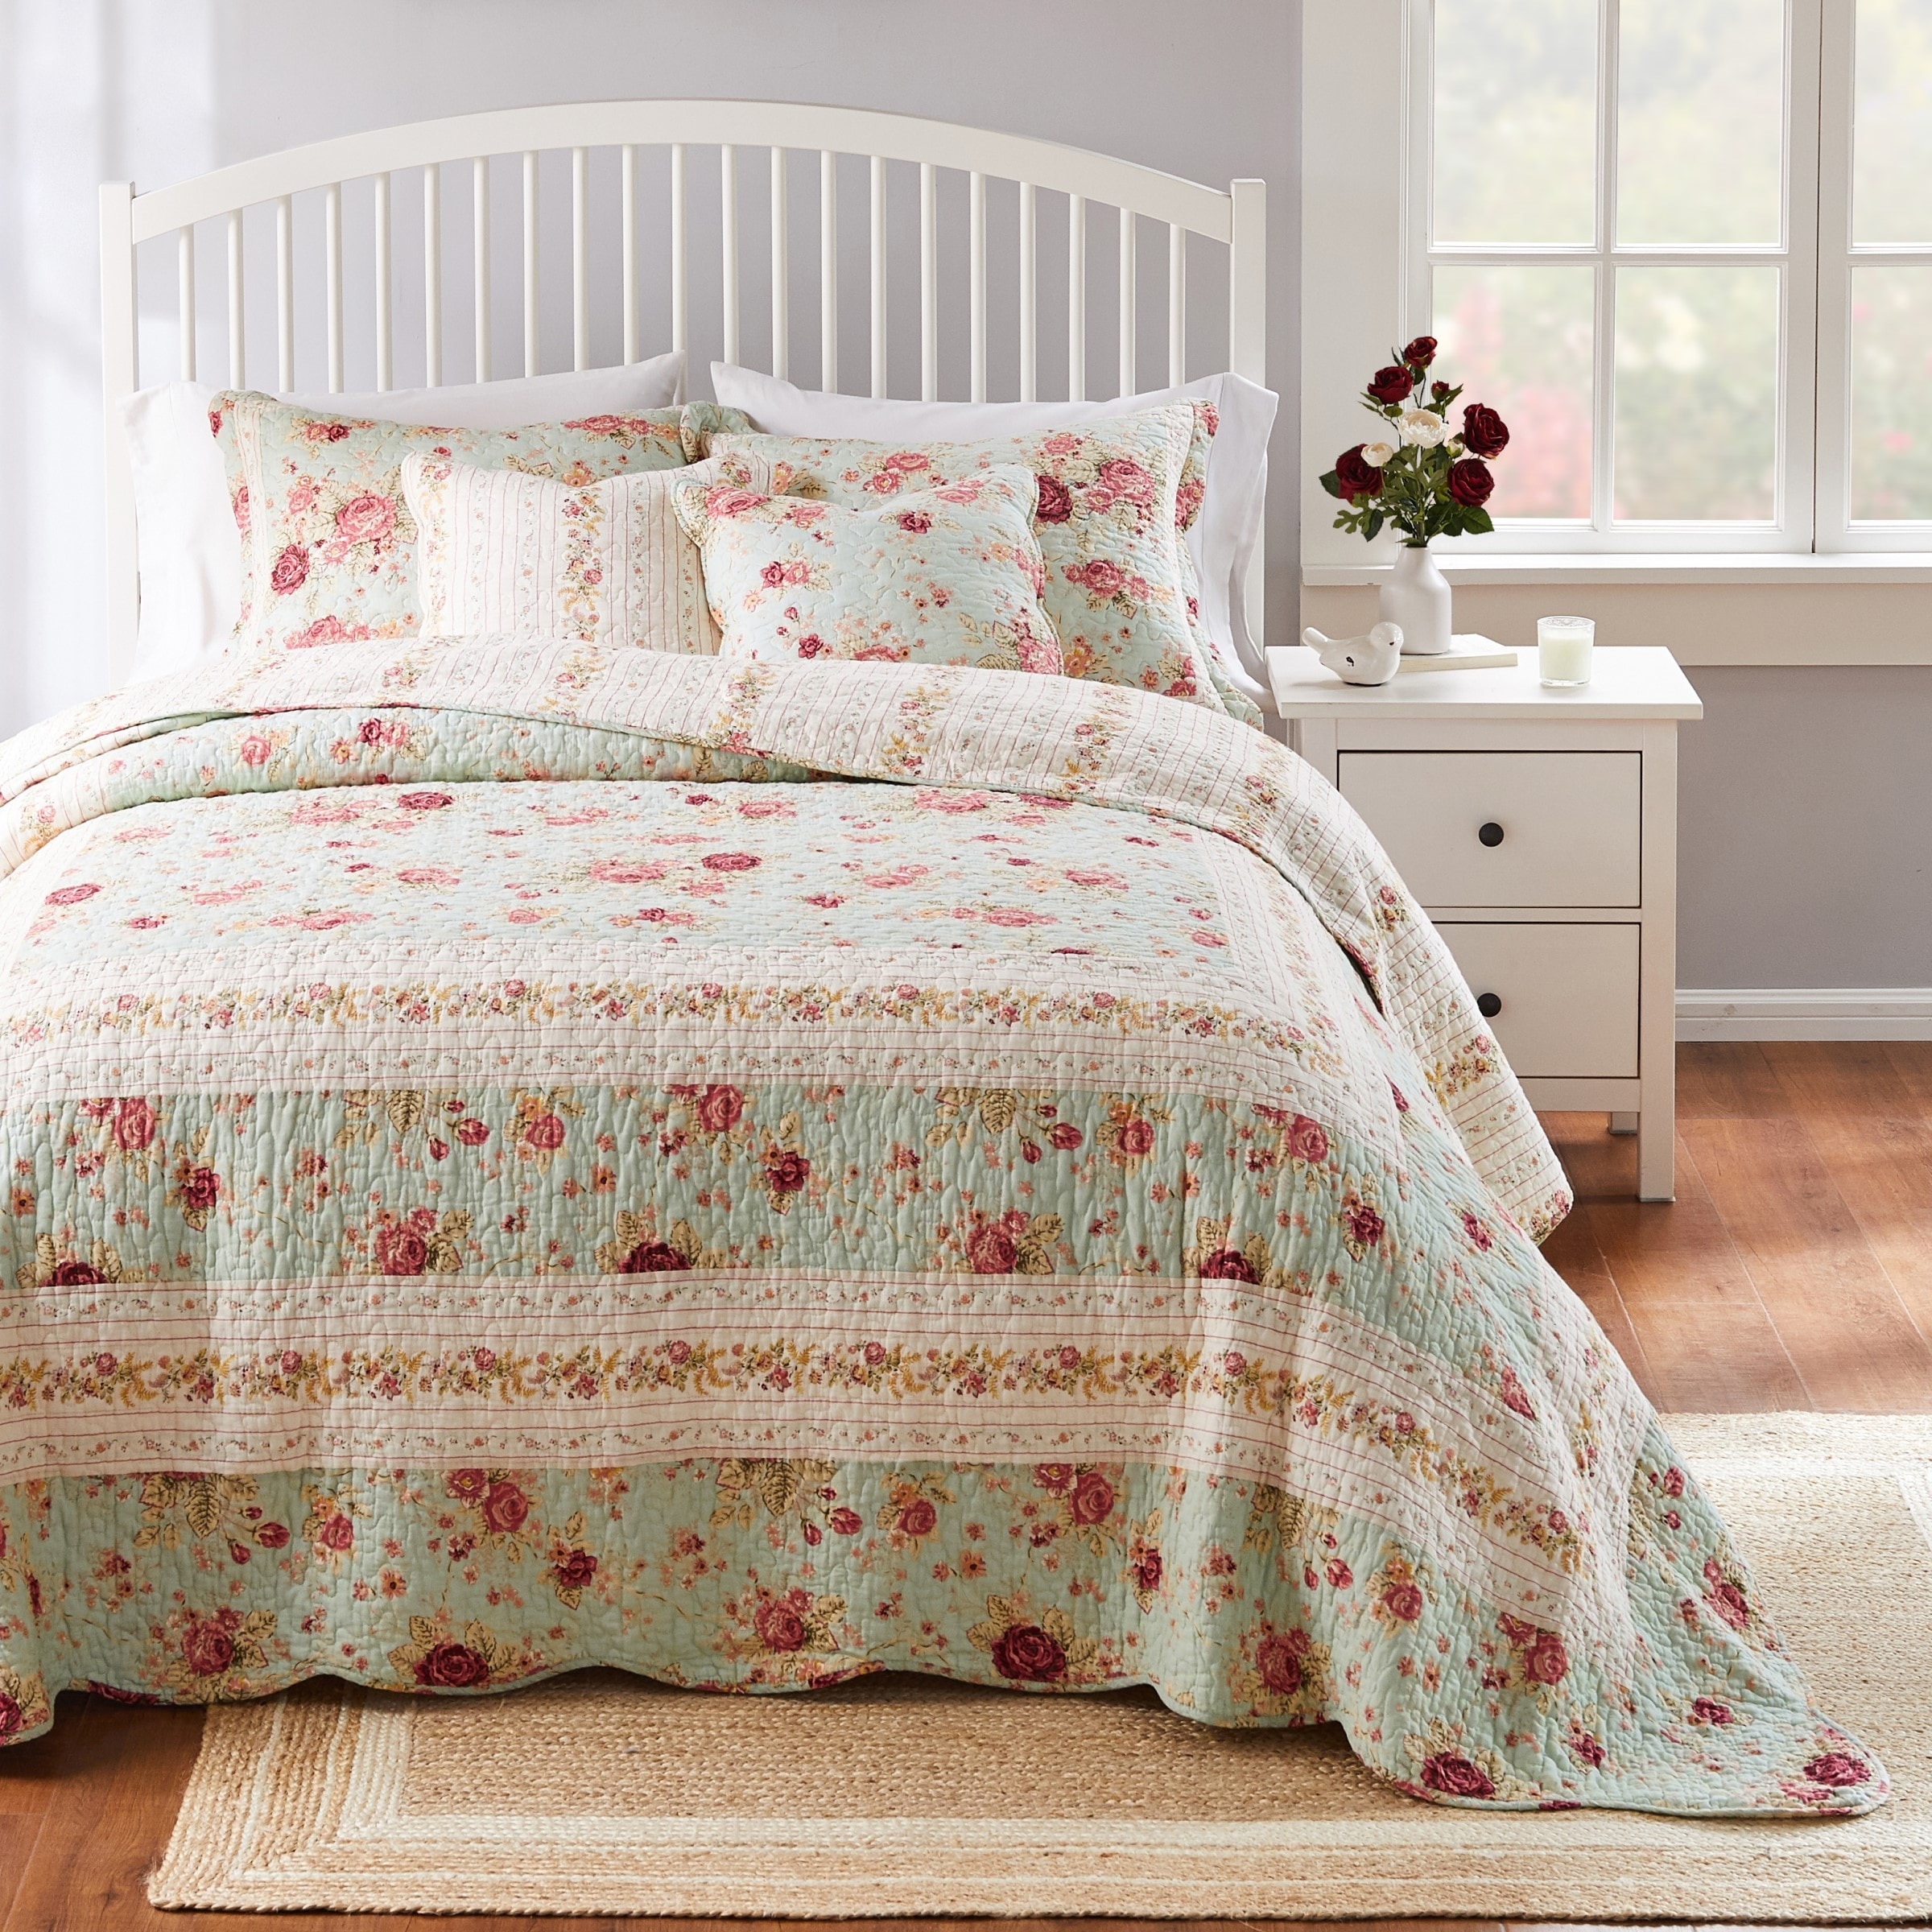 https://ak1.ostkcdn.com/images/products/is/images/direct/6471d7354d3452afdf677da0c0169979803e0772/Greenland-Home-Fashions-Antique-Rose-All-Cotton-Reversible-Quilt-Set.jpg